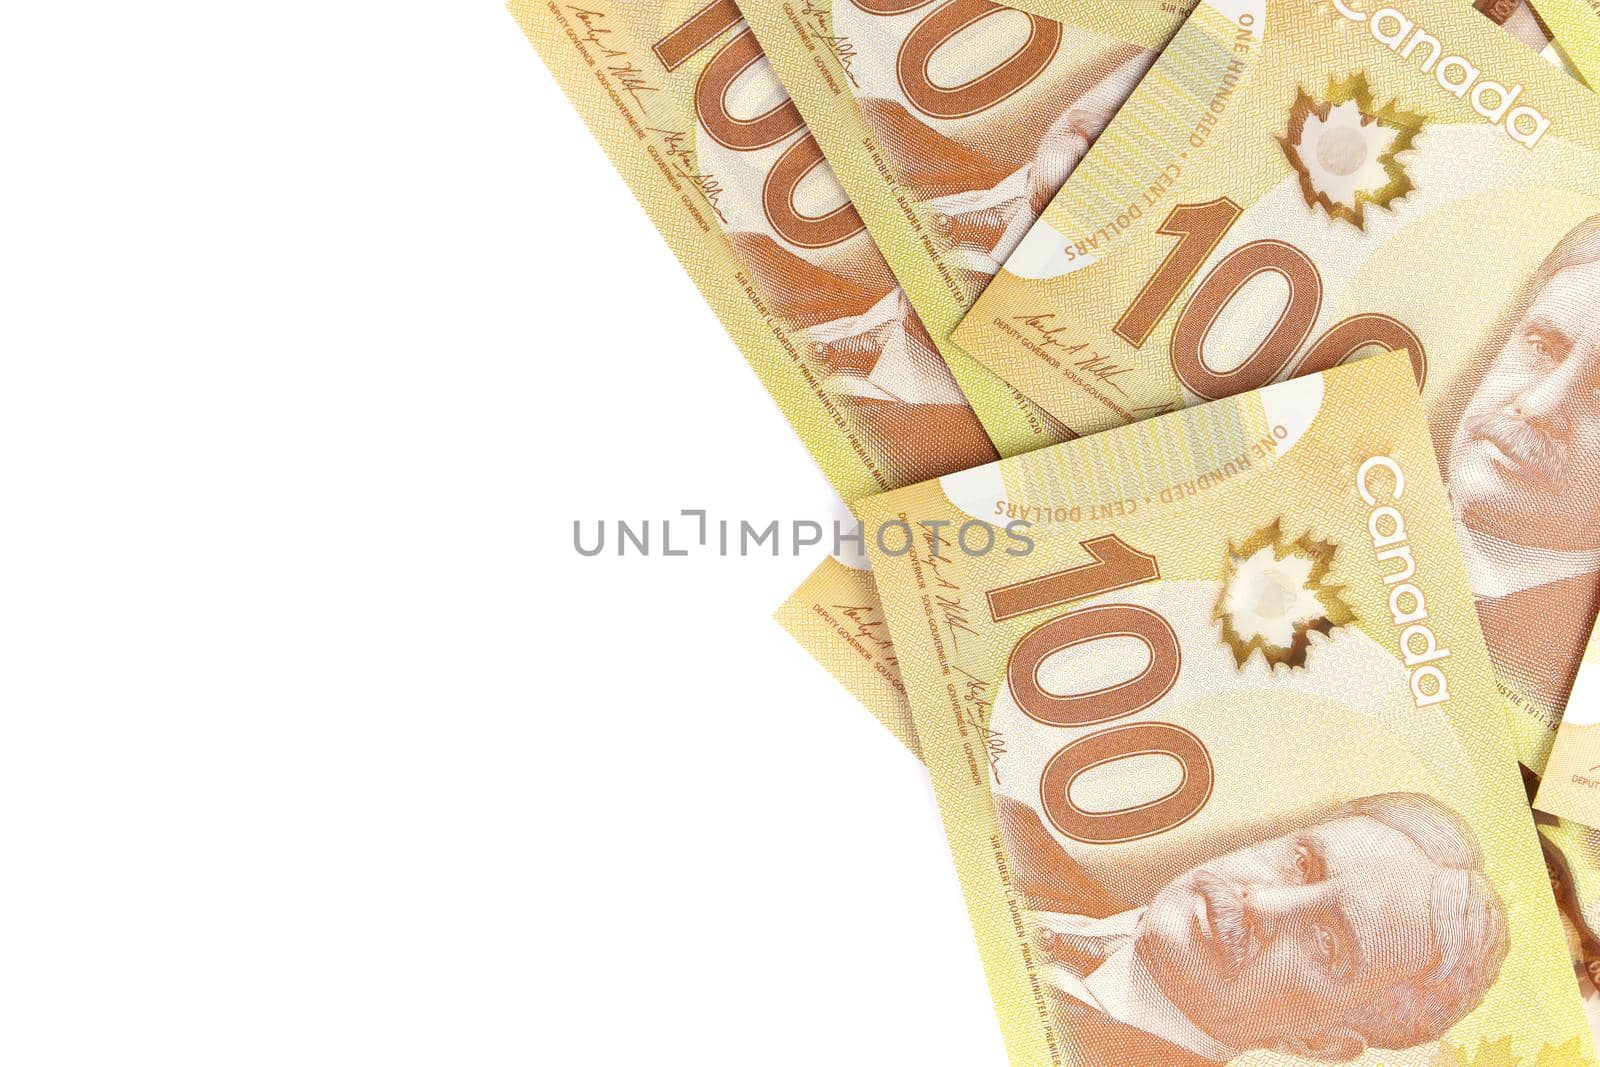 A Directly Above Image of Crisp Canadian 100 One Hundred Dollar Bills on a White Background. Banknotes are piled randomly on top of each other. Plenty of White Copy Space on Frame Left. High quality photo